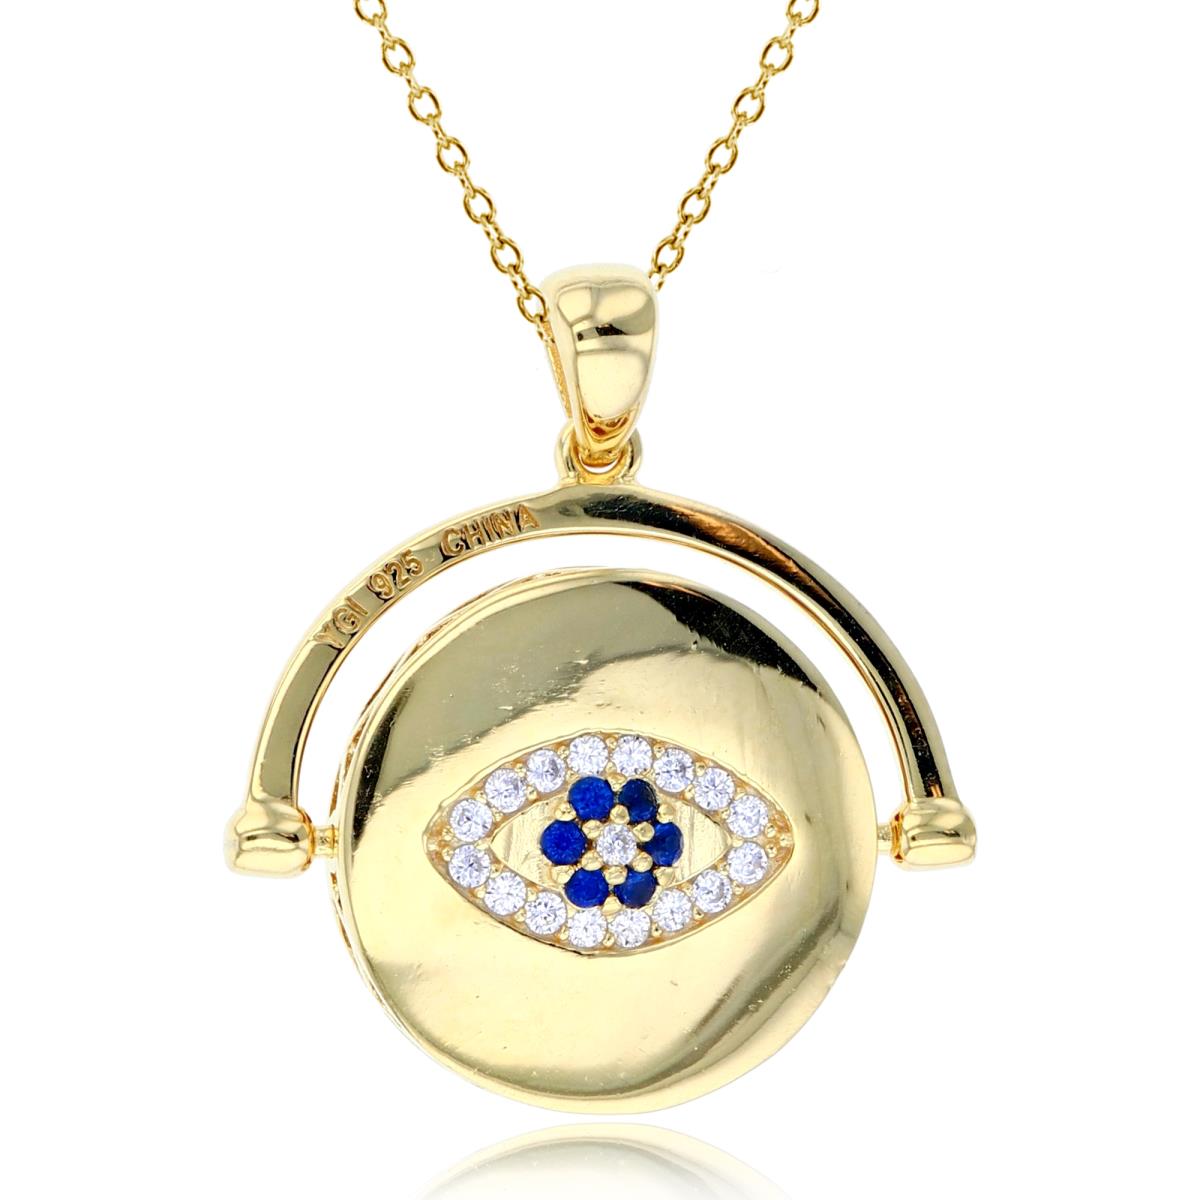 Sterling Silver+1Micron Yellow Gold Spinning Circle with Rnd White & #114 Bl. Spinel Evil Eye 18"Necklace